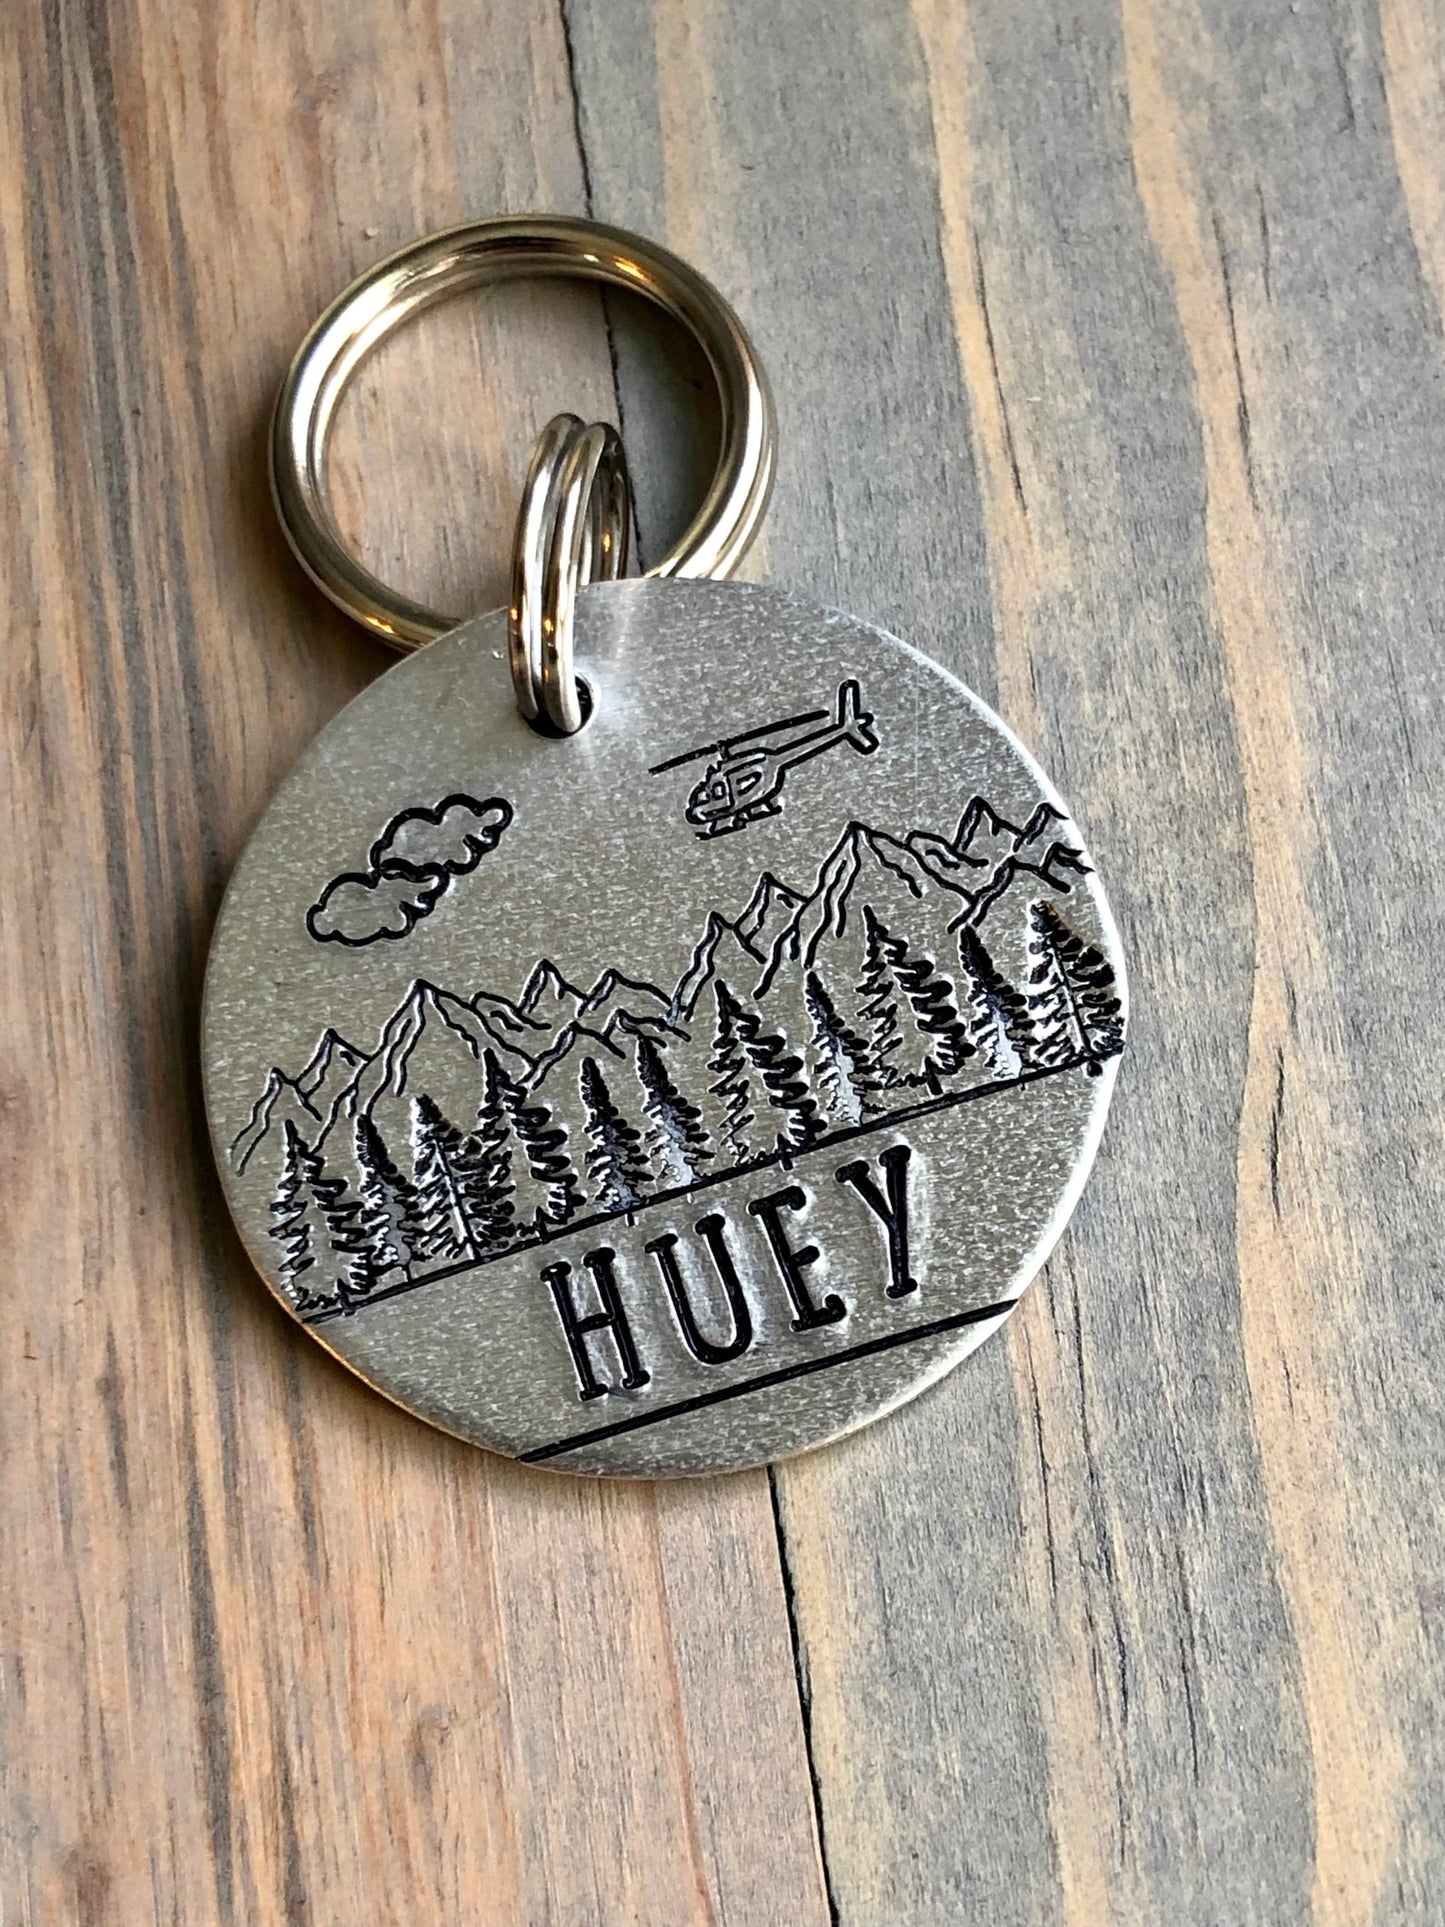 Name Tag for Dog with Helicopter, Hand Stamped Pet ID Tag, Huey, Personalized Dog Tag for Dog, Mountains, Trees, Chopper, Seahawk, Apache